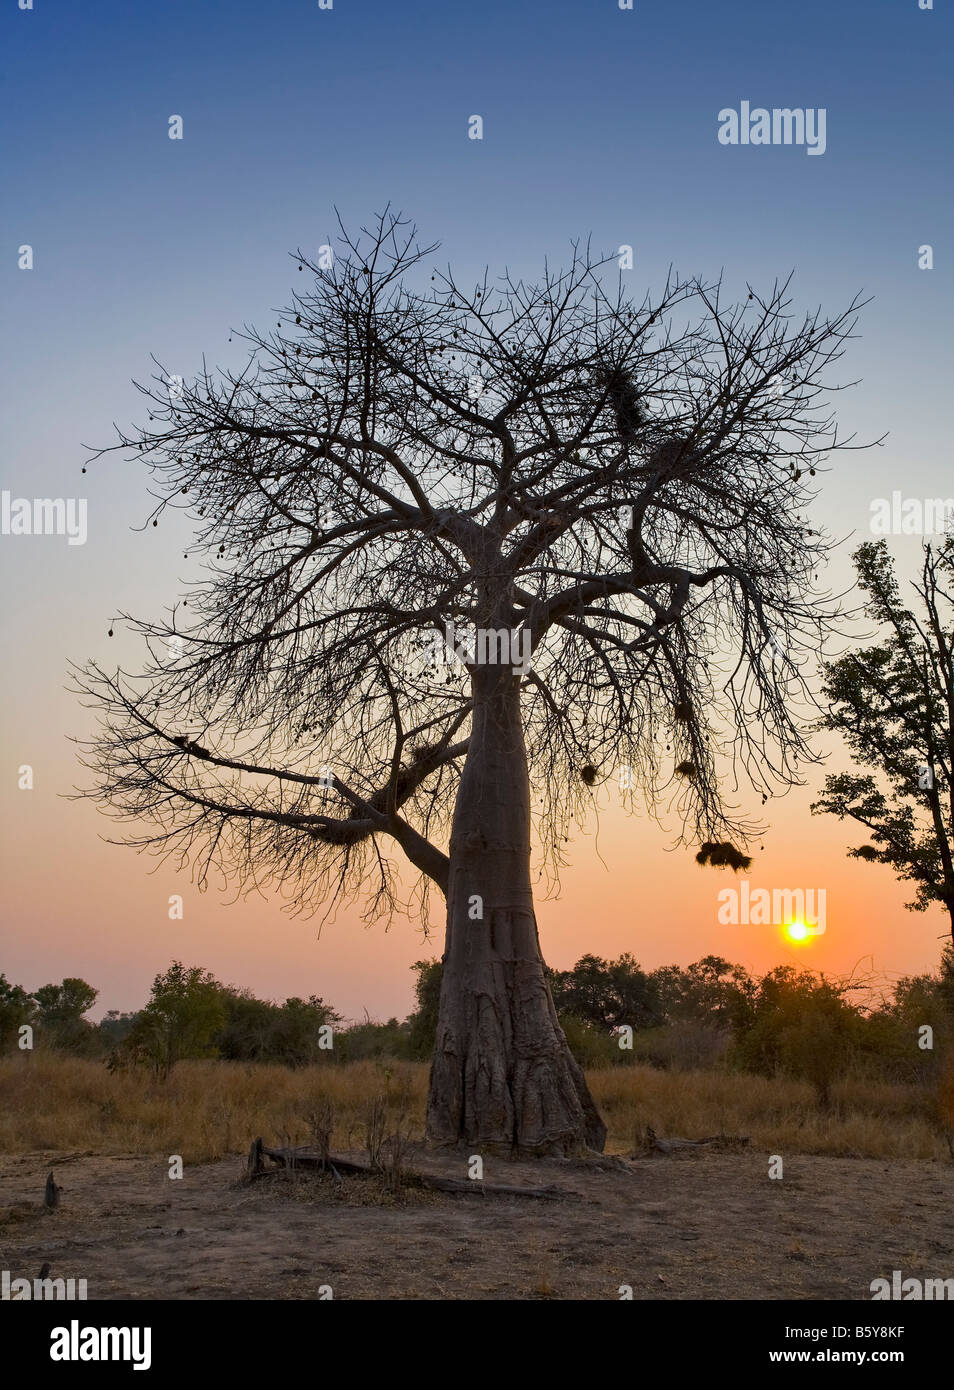 Baobab tree at South Luangwa National Park in Zambia Stock Photo